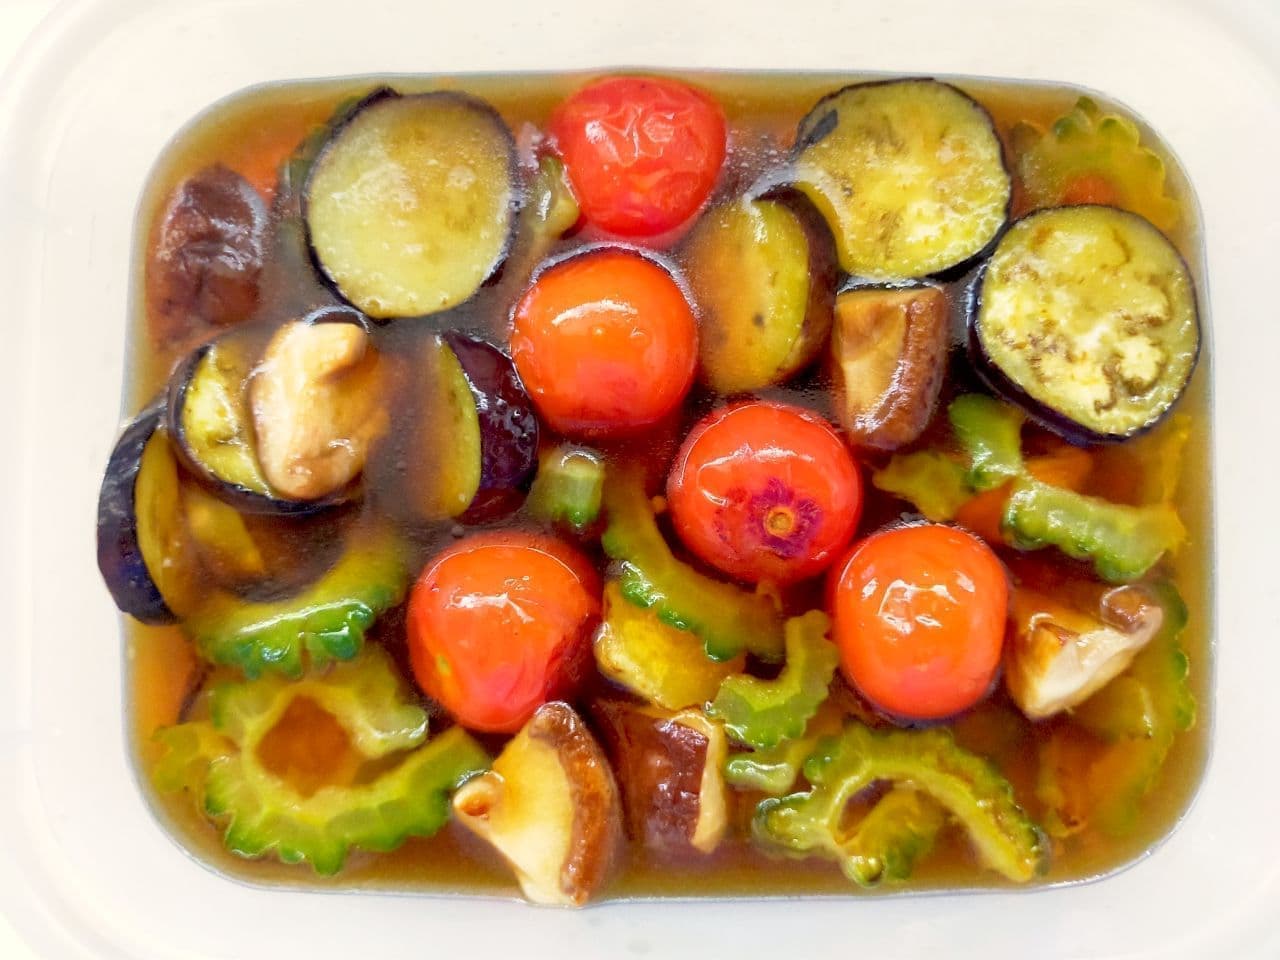 "Eggplant and summer vegetables grilled" recipe